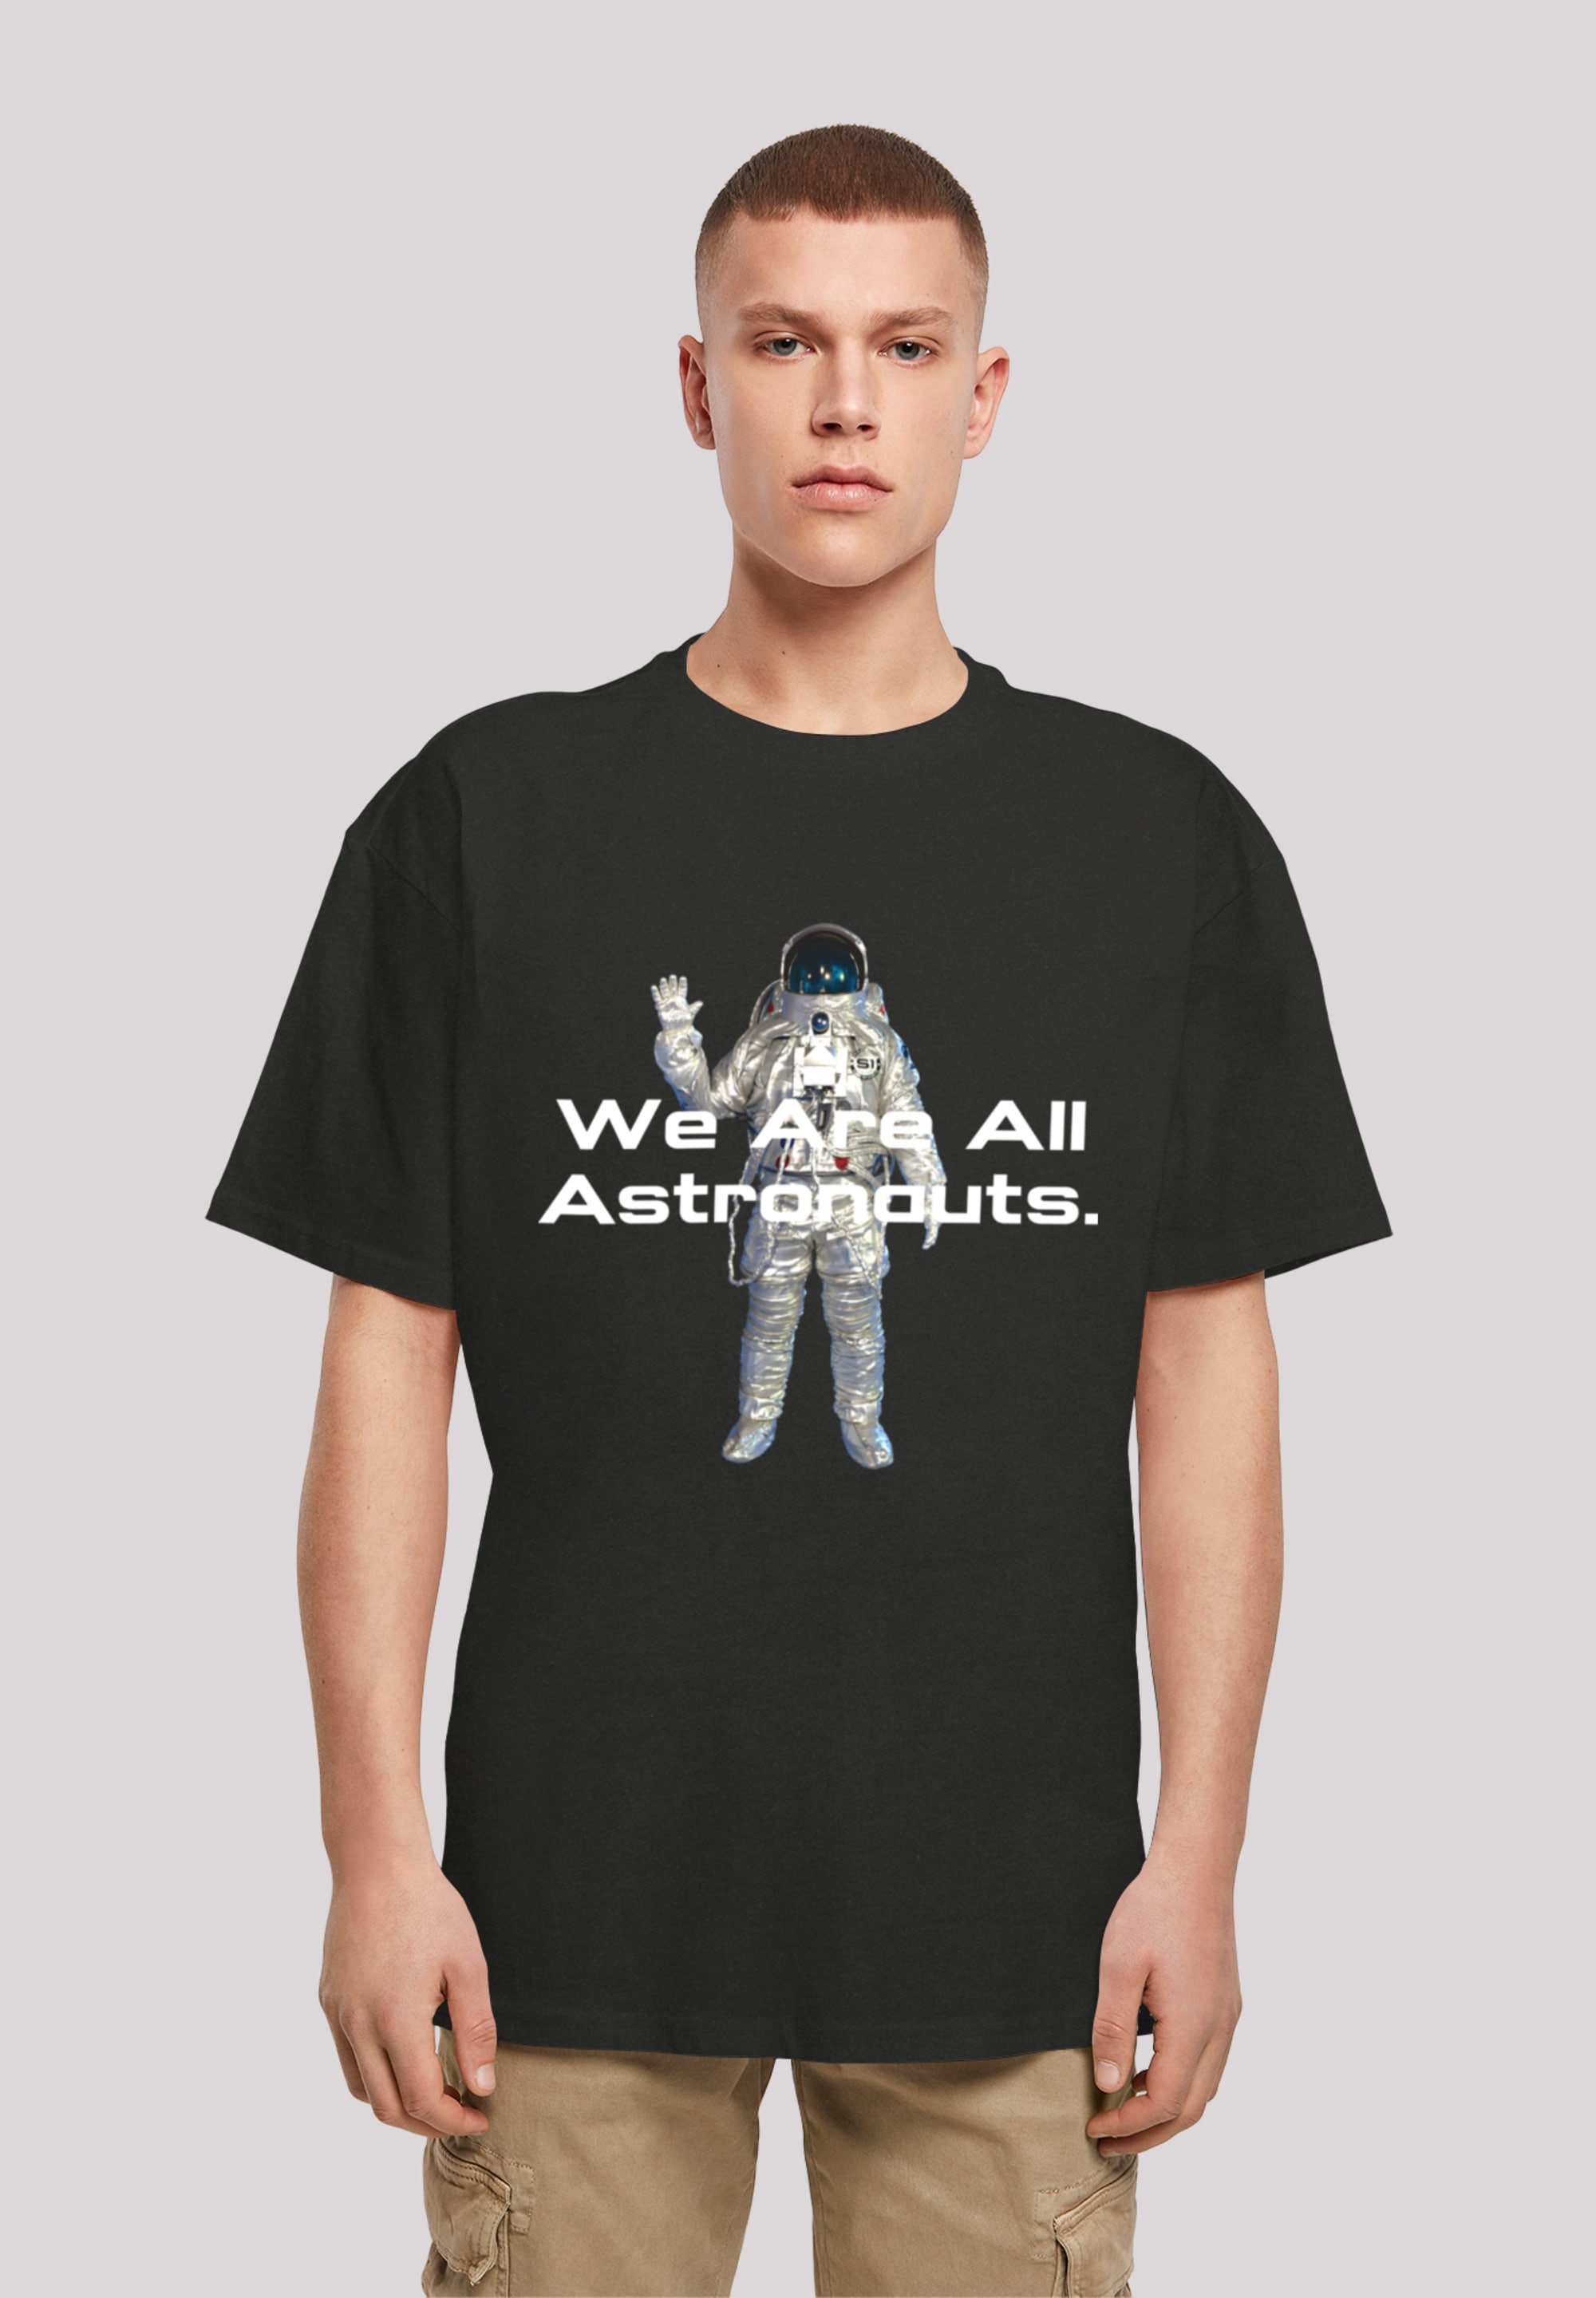 T-Shirt Print | kaufen are astronauts«, SpaceOne »PHIBER BAUR ▷ We all F4NT4STIC